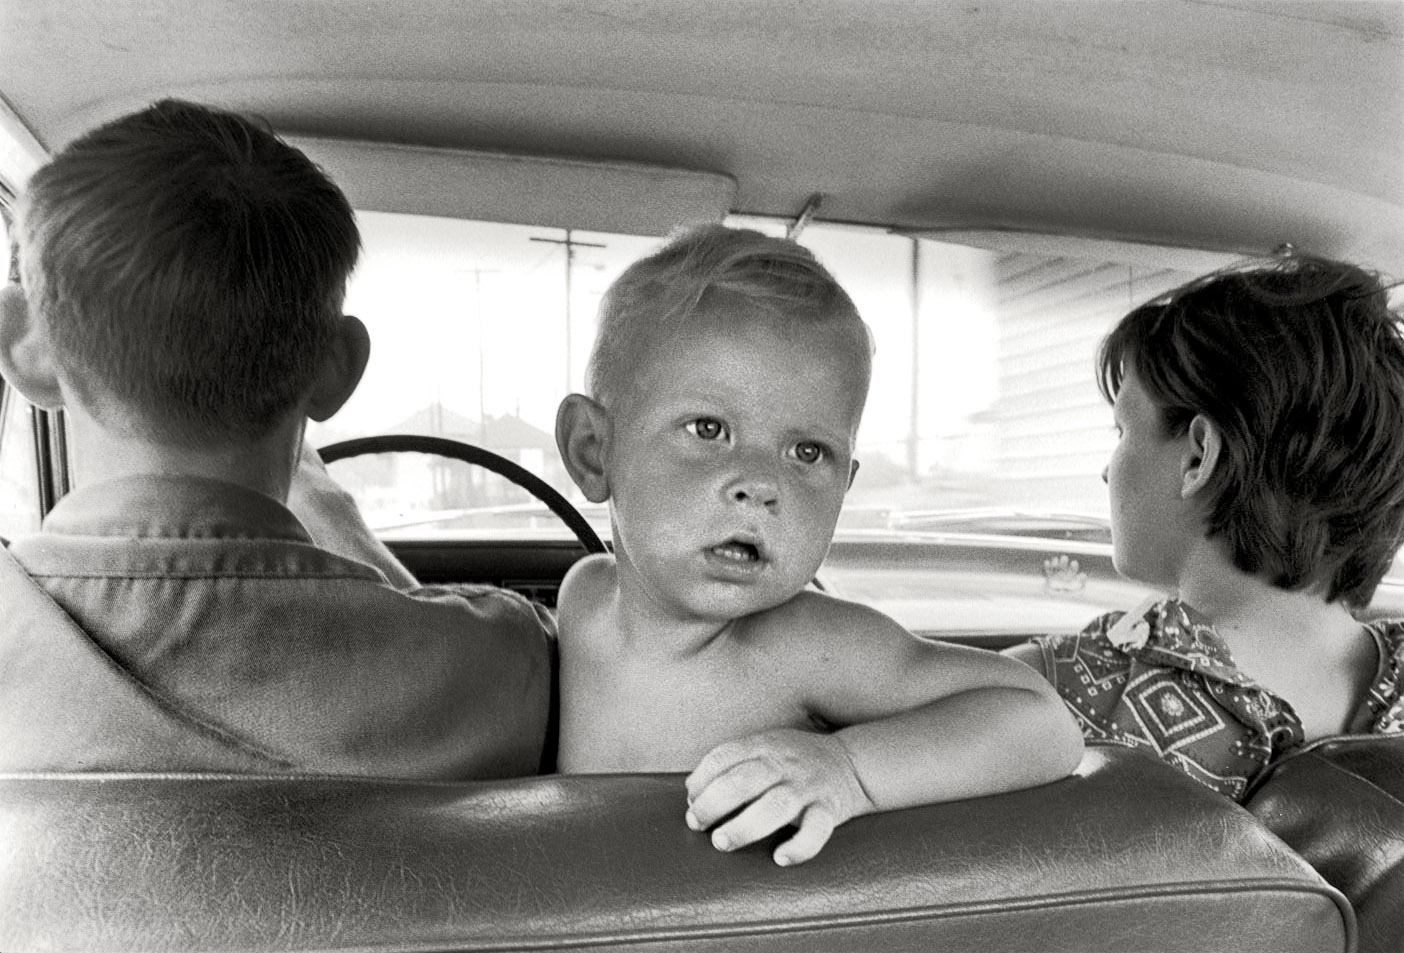 "Cornett family, Kentucky, 1972. Family in car, baby looking back." Our daily dose of the Cornetts and their cars. Print from 35mm negative by William Gedney. Gedney Photographs and Writings Collection, Duke University.  View full size.